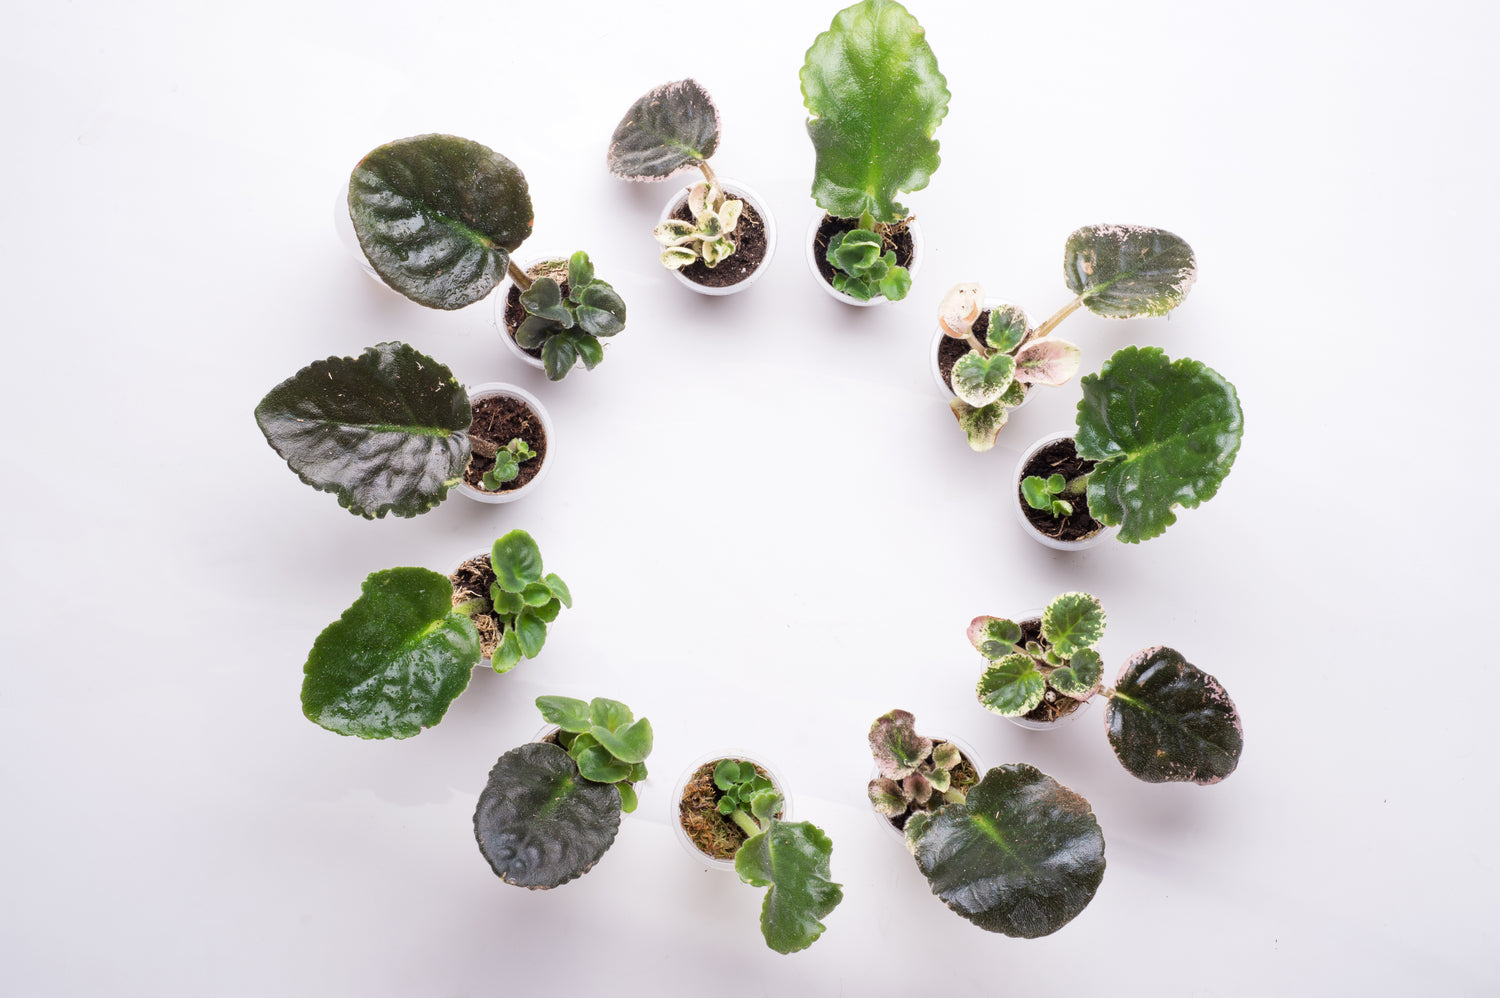 The image shows a ring of African violets propagating in cups, arranged in a circle on a white background. Each cup contains a singular leaf and sometimes multiple buds sprout from the leaf.